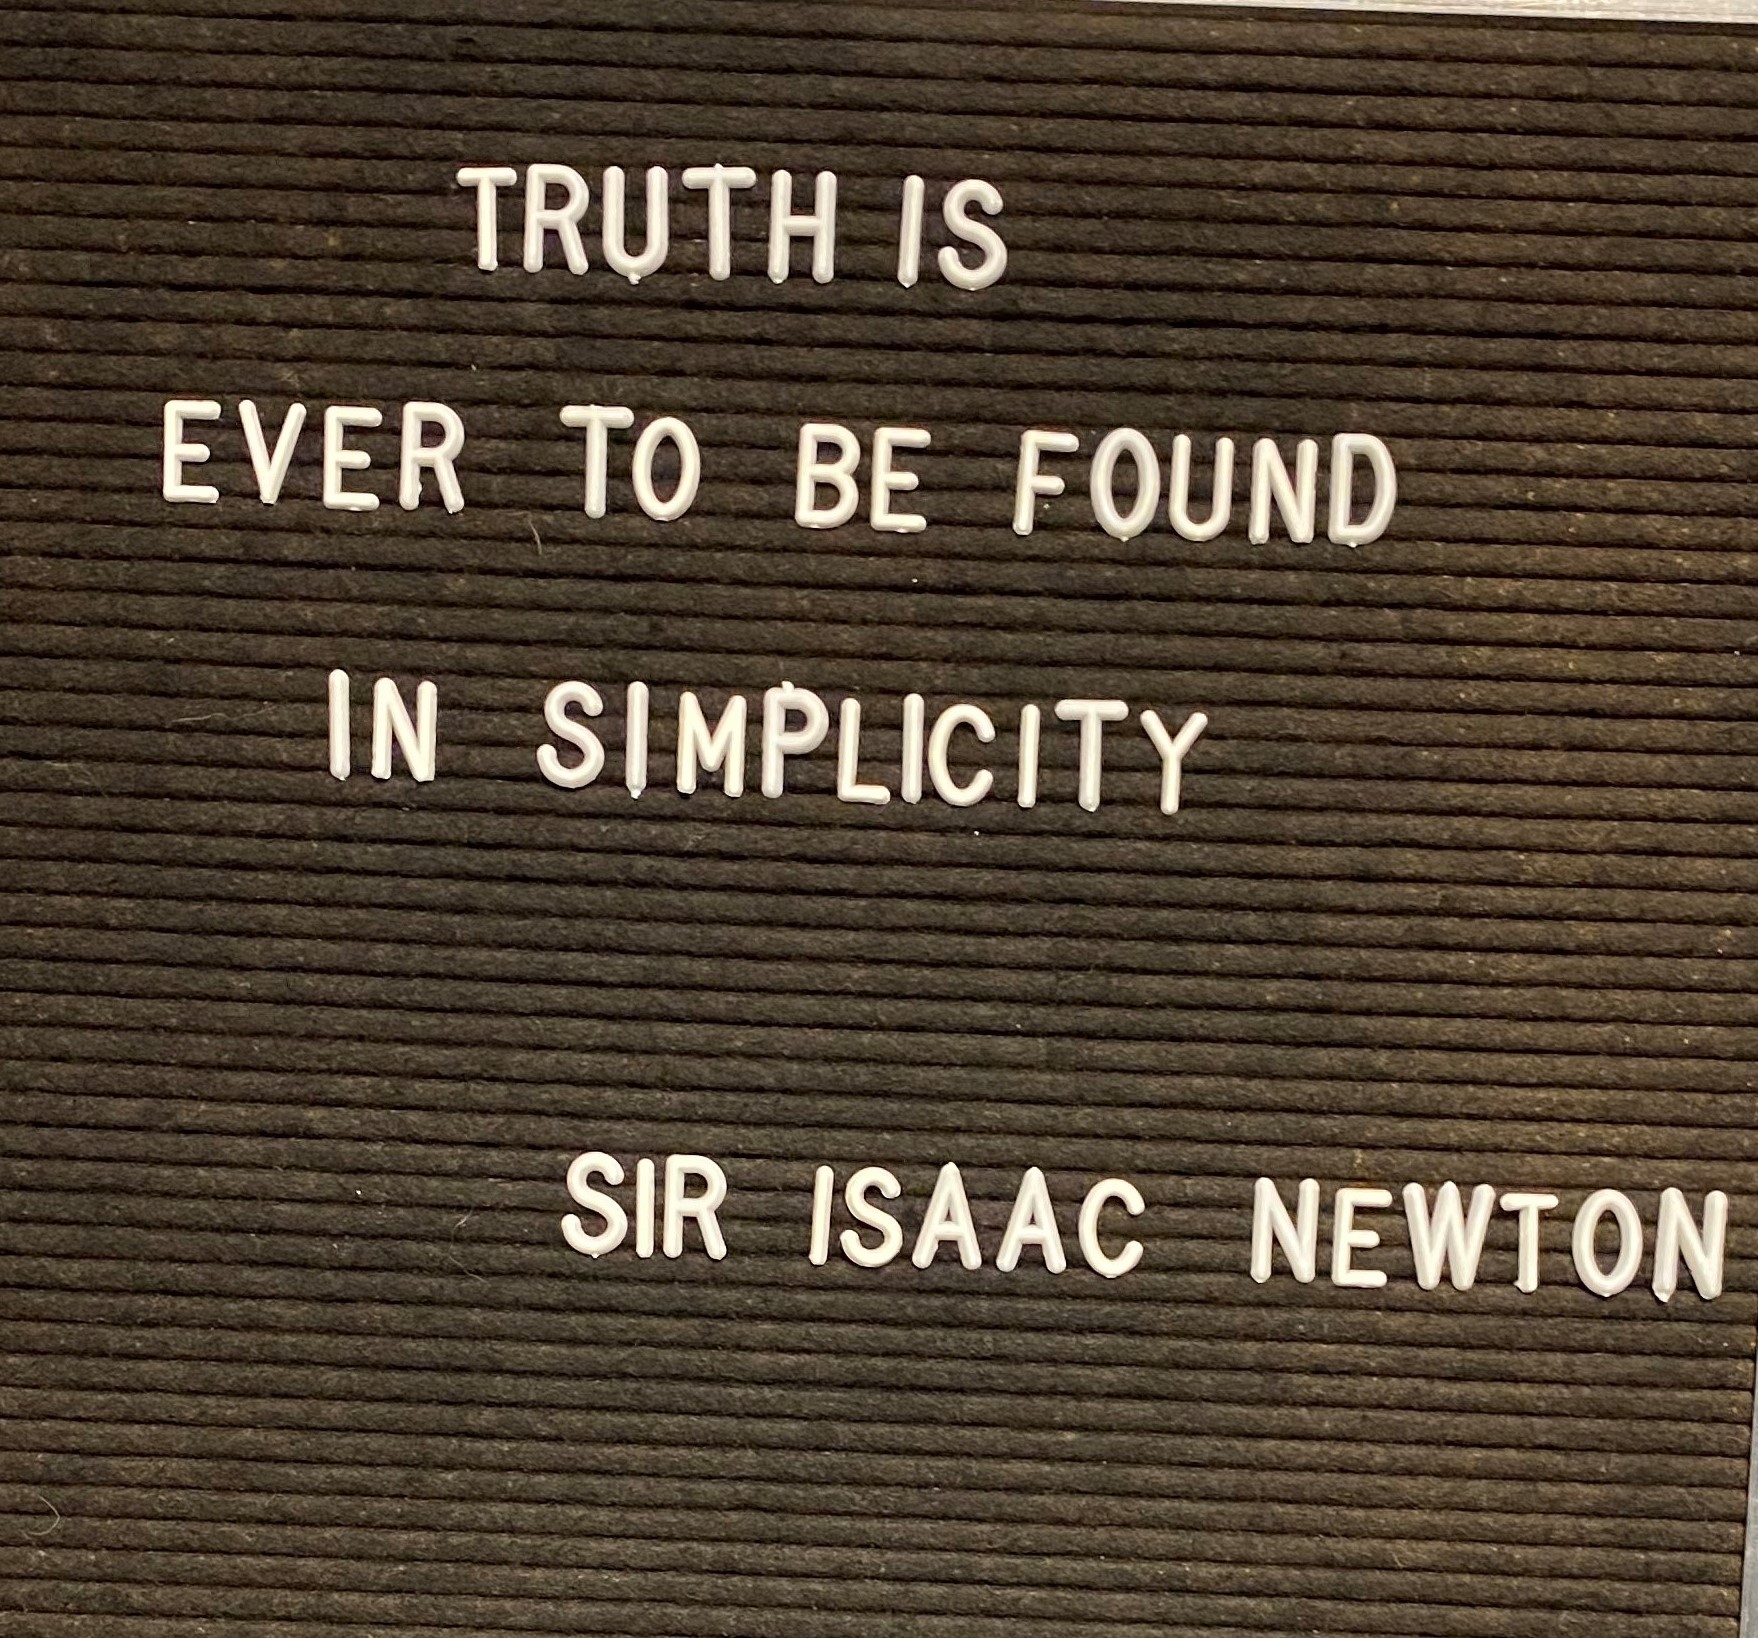 Sir Isaac Newton quote